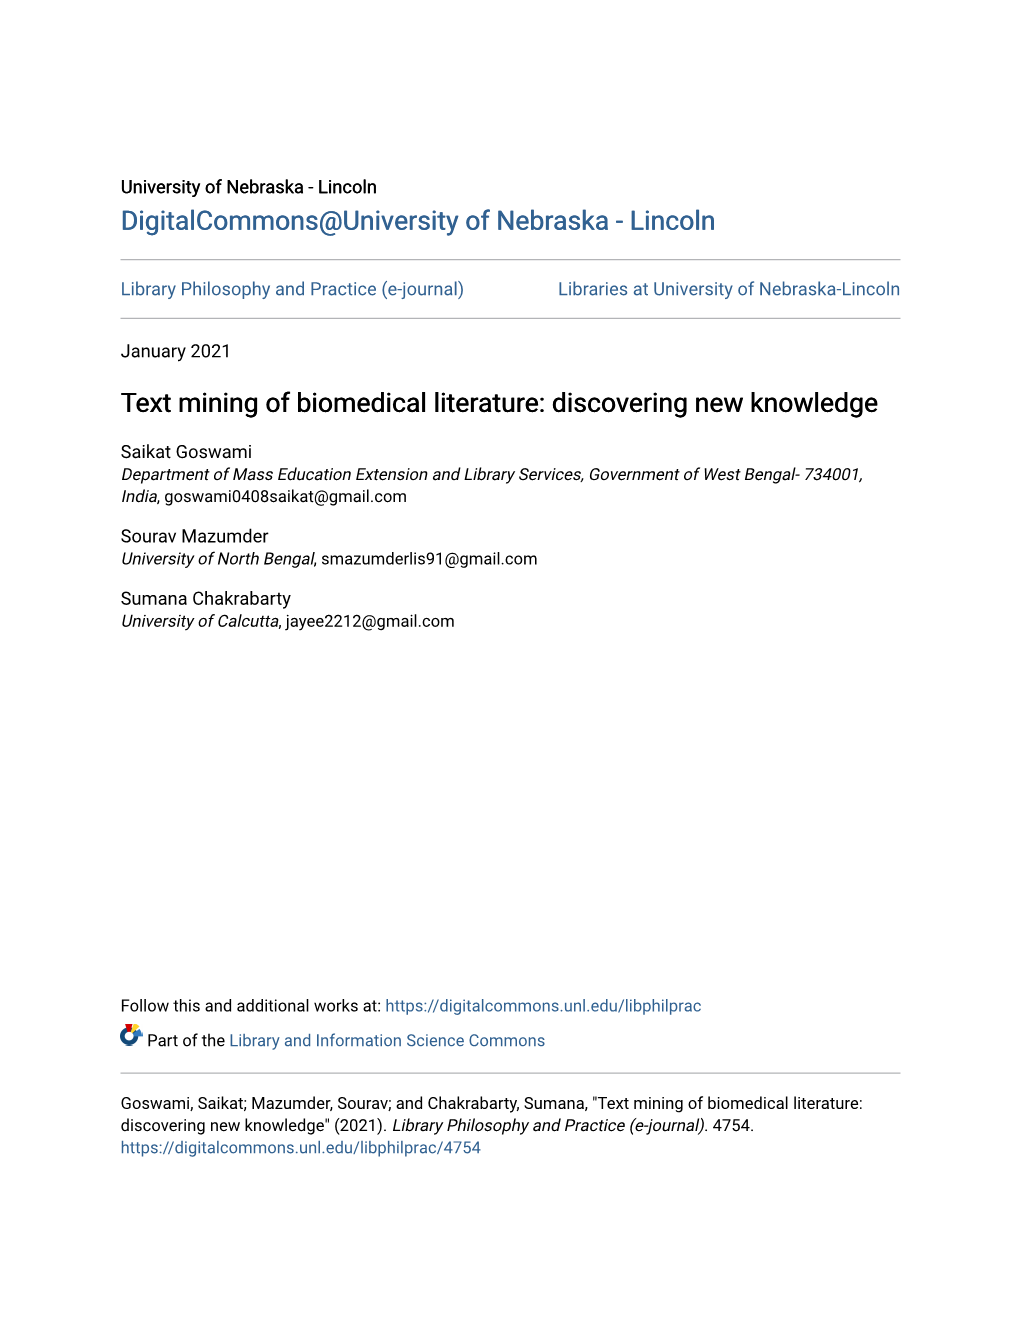 Text Mining of Biomedical Literature: Discovering New Knowledge